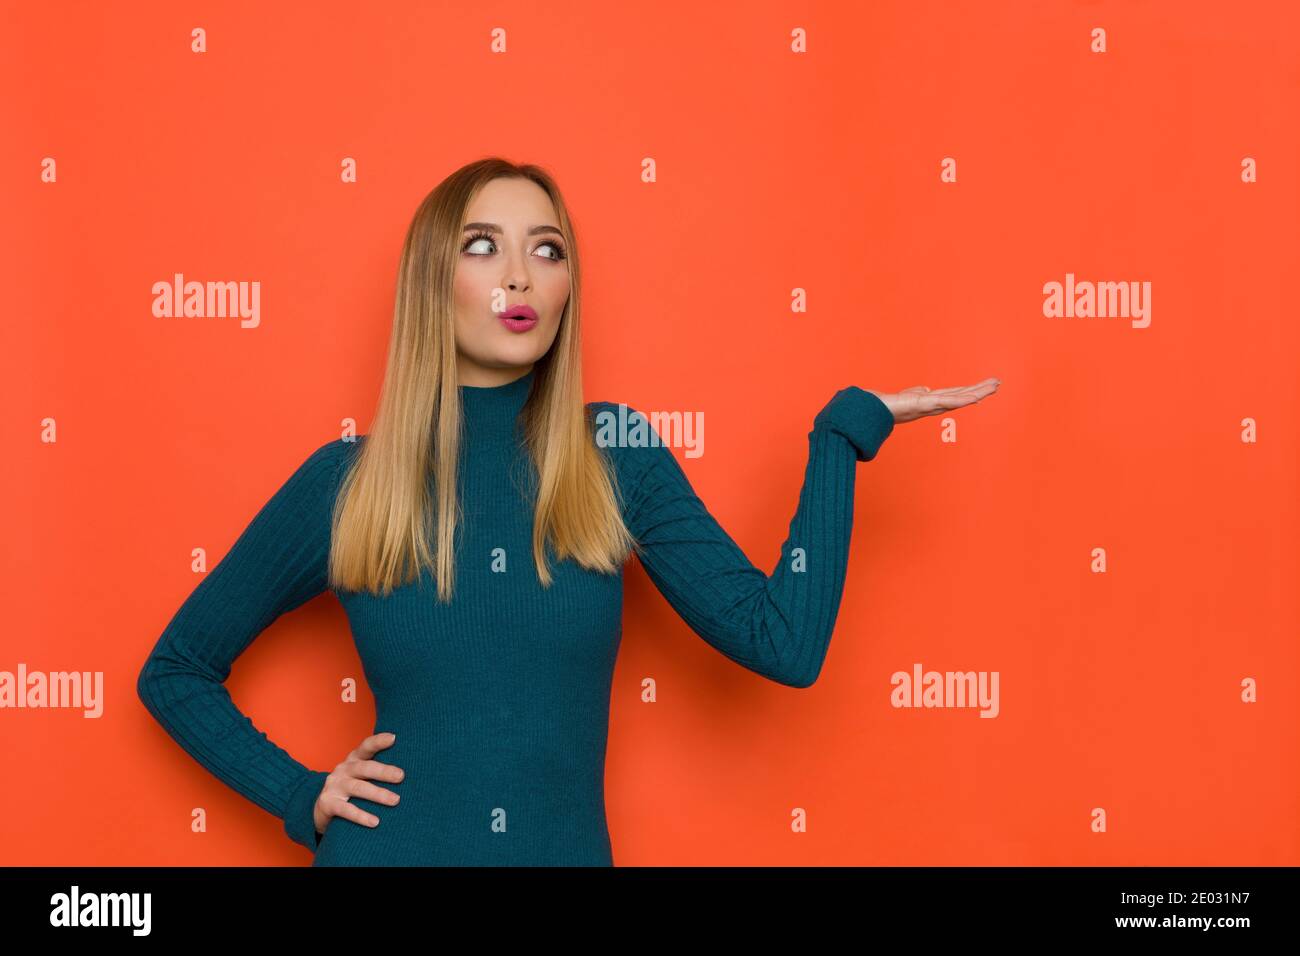 Surprised young woman in teal sweater is holding hand raised and looking at the side. Waist up studio shot on orange background. Stock Photo